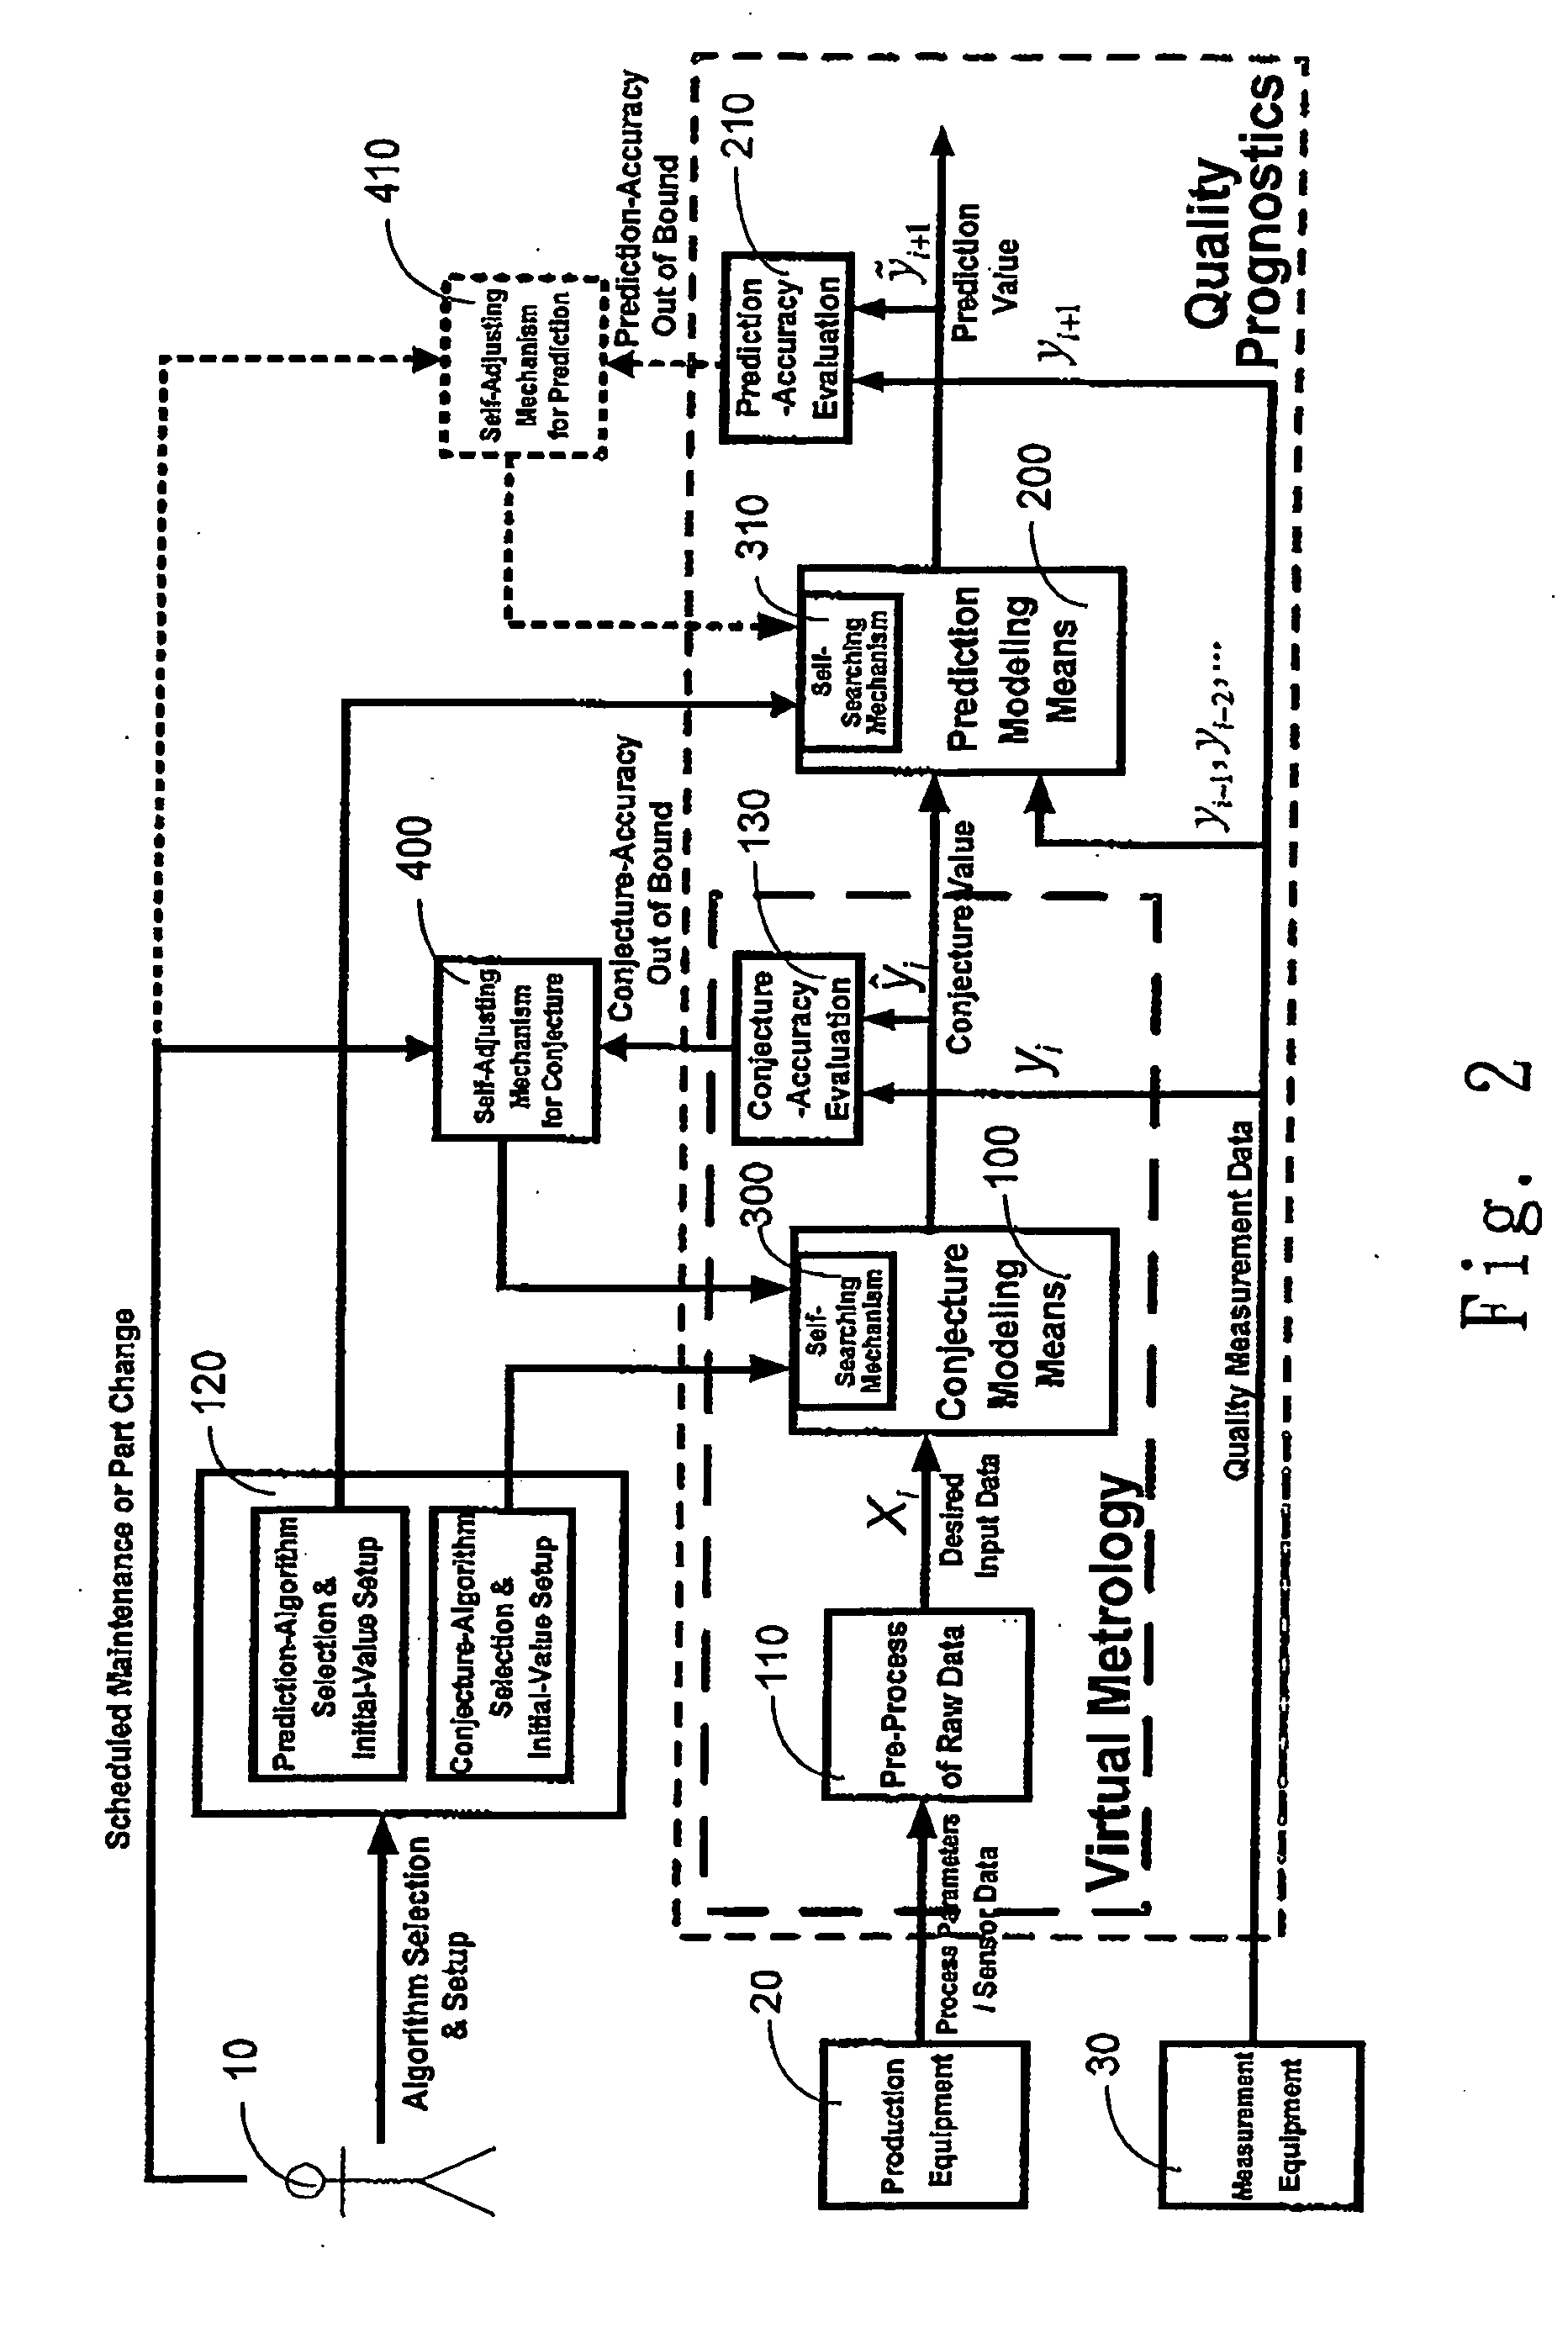 Quality prognostics system and method for manufacturing processes